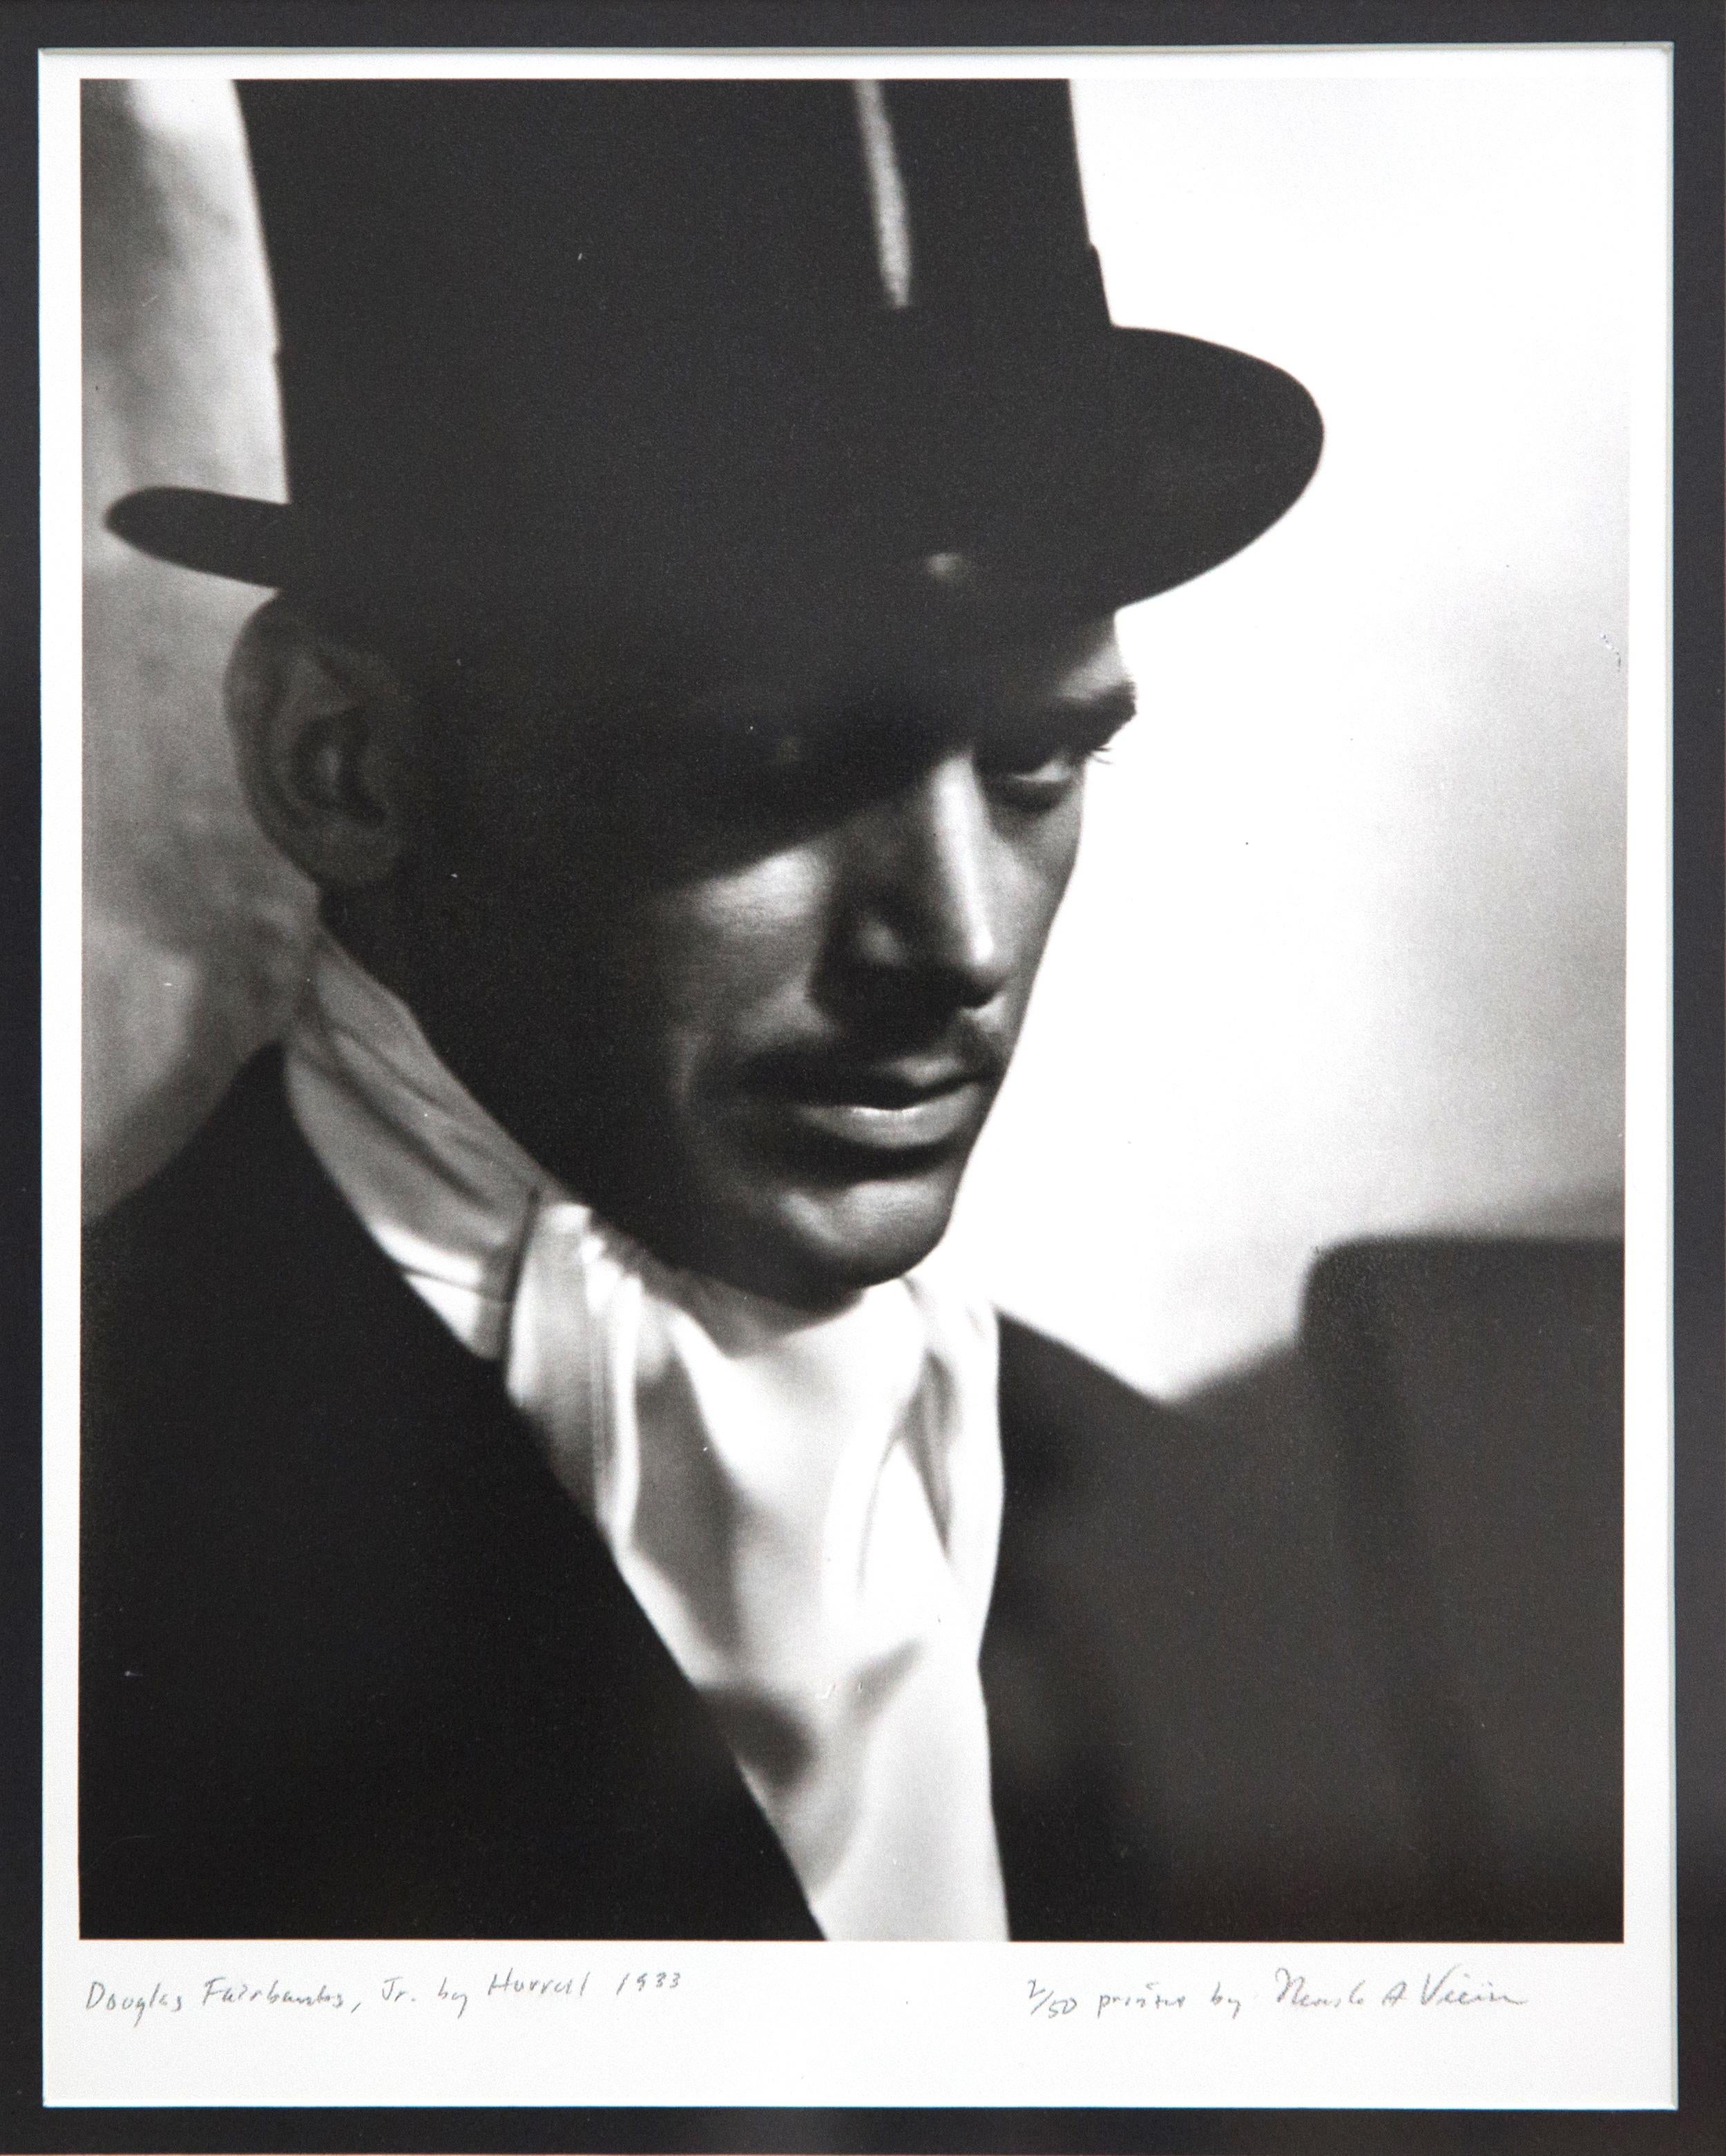 Offered is a striking, signed vintage silver print photograph in the Art Deco style of Hollywood Actor Douglas Fairbanks, Jr. Hurrell worked for MGM and Warner Brothers. In the 1930s and opened his own studio on Sunset Boulevard. He photographed